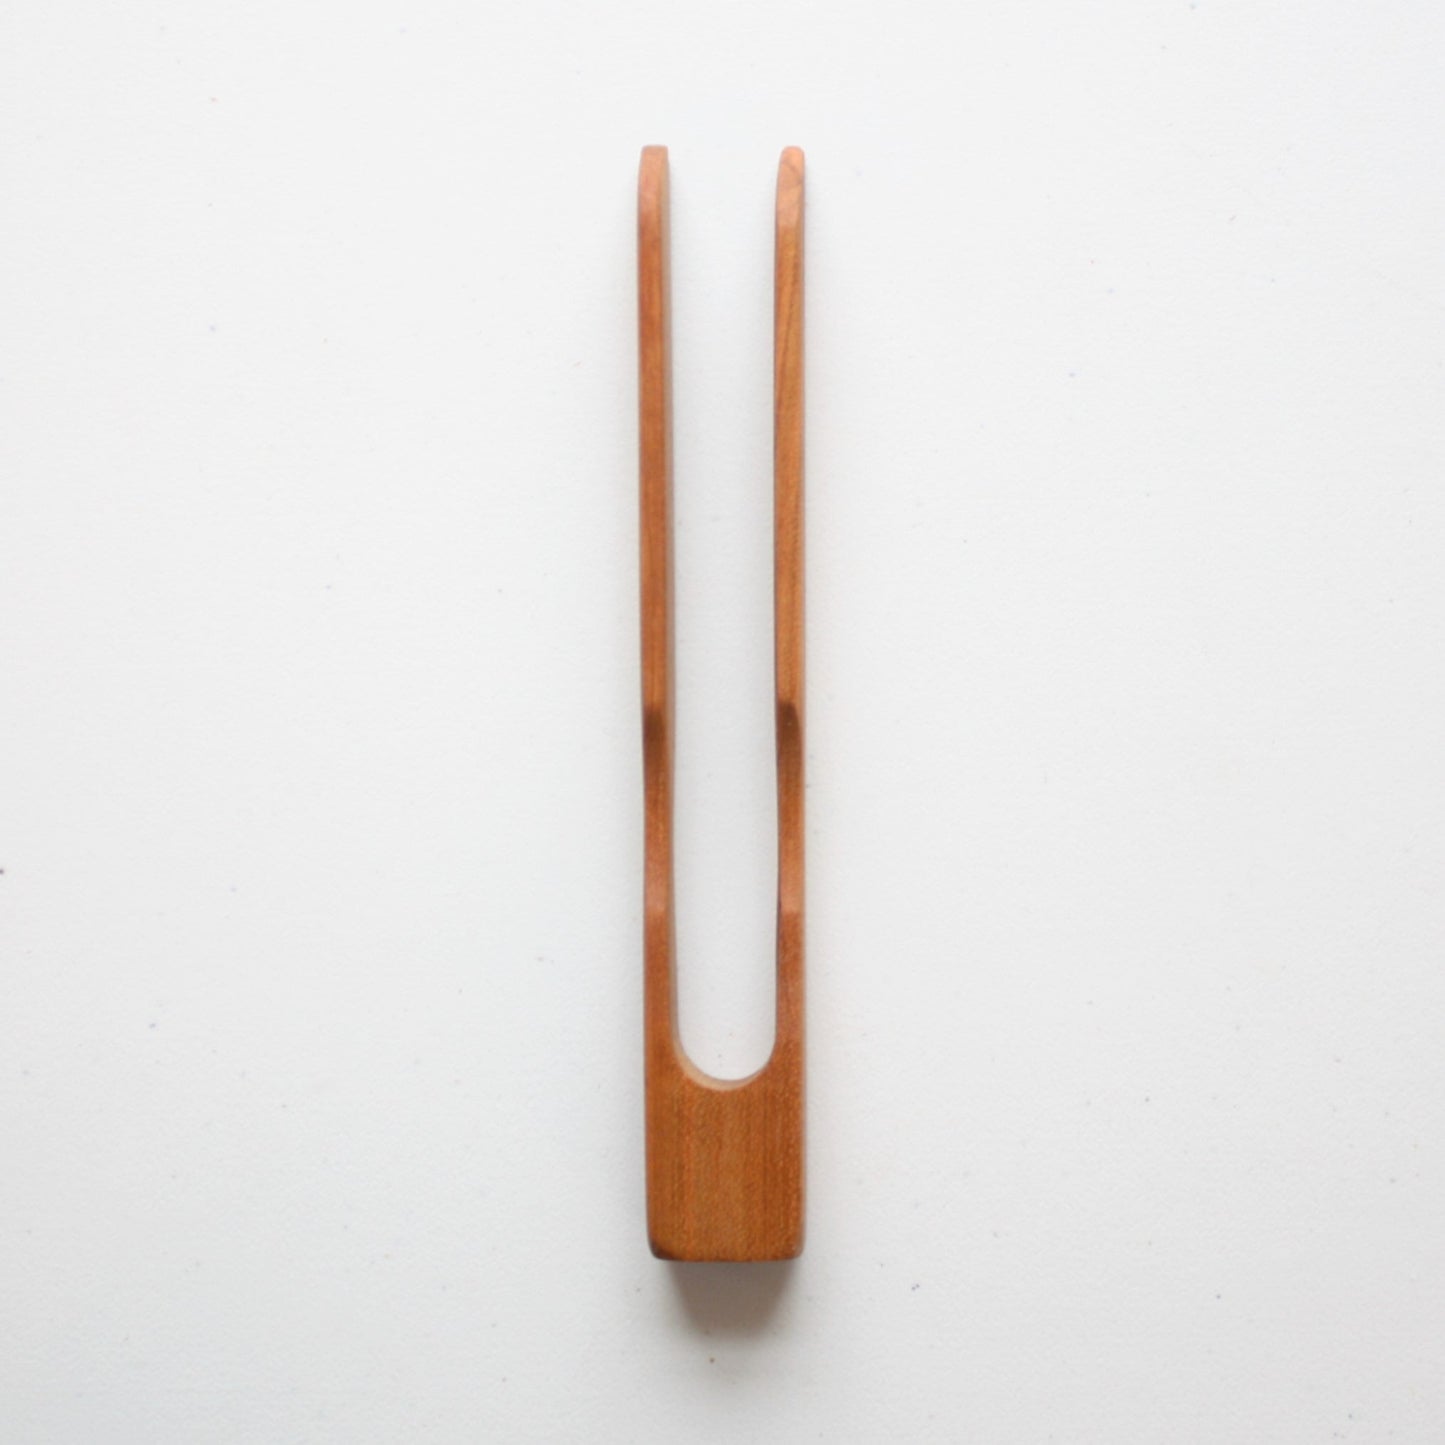 Handmade Wooden Toast Tongs - Made in the USA